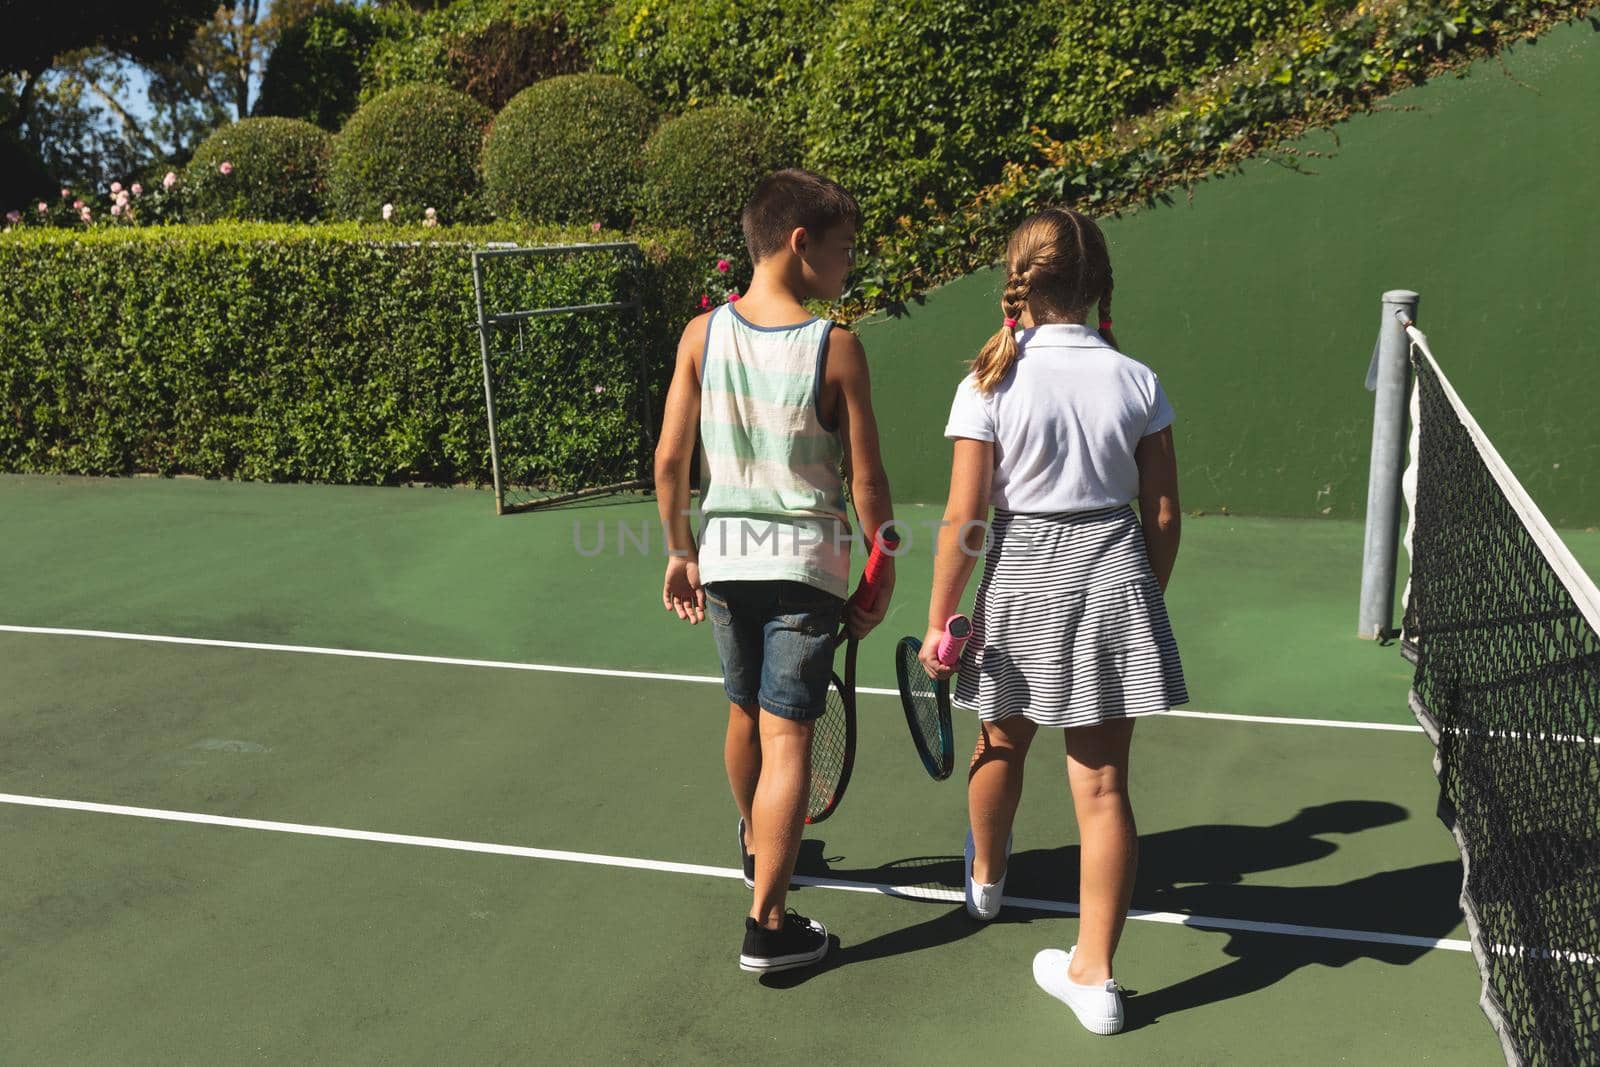 Caucasian boy and girl outdoors, holding tennis rackets and walking on tennis court by Wavebreakmedia